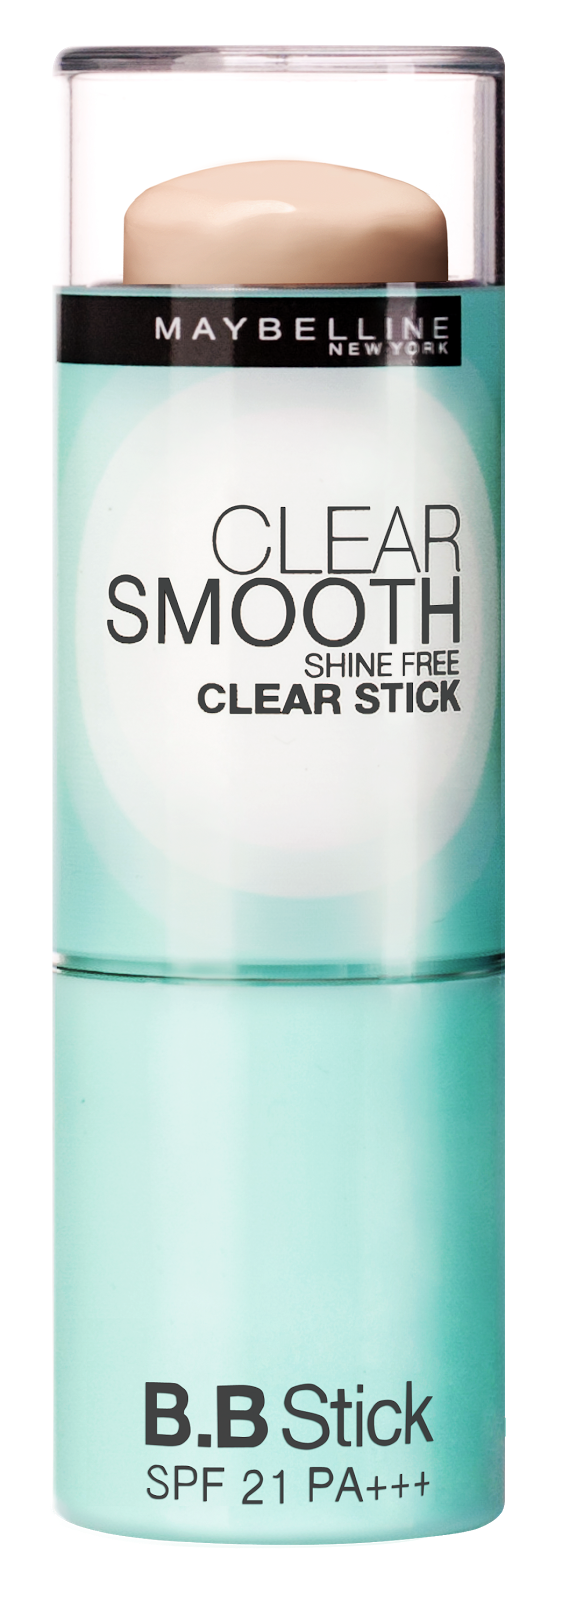 Maybelline Clear Smooth Shine Free Clear Stick